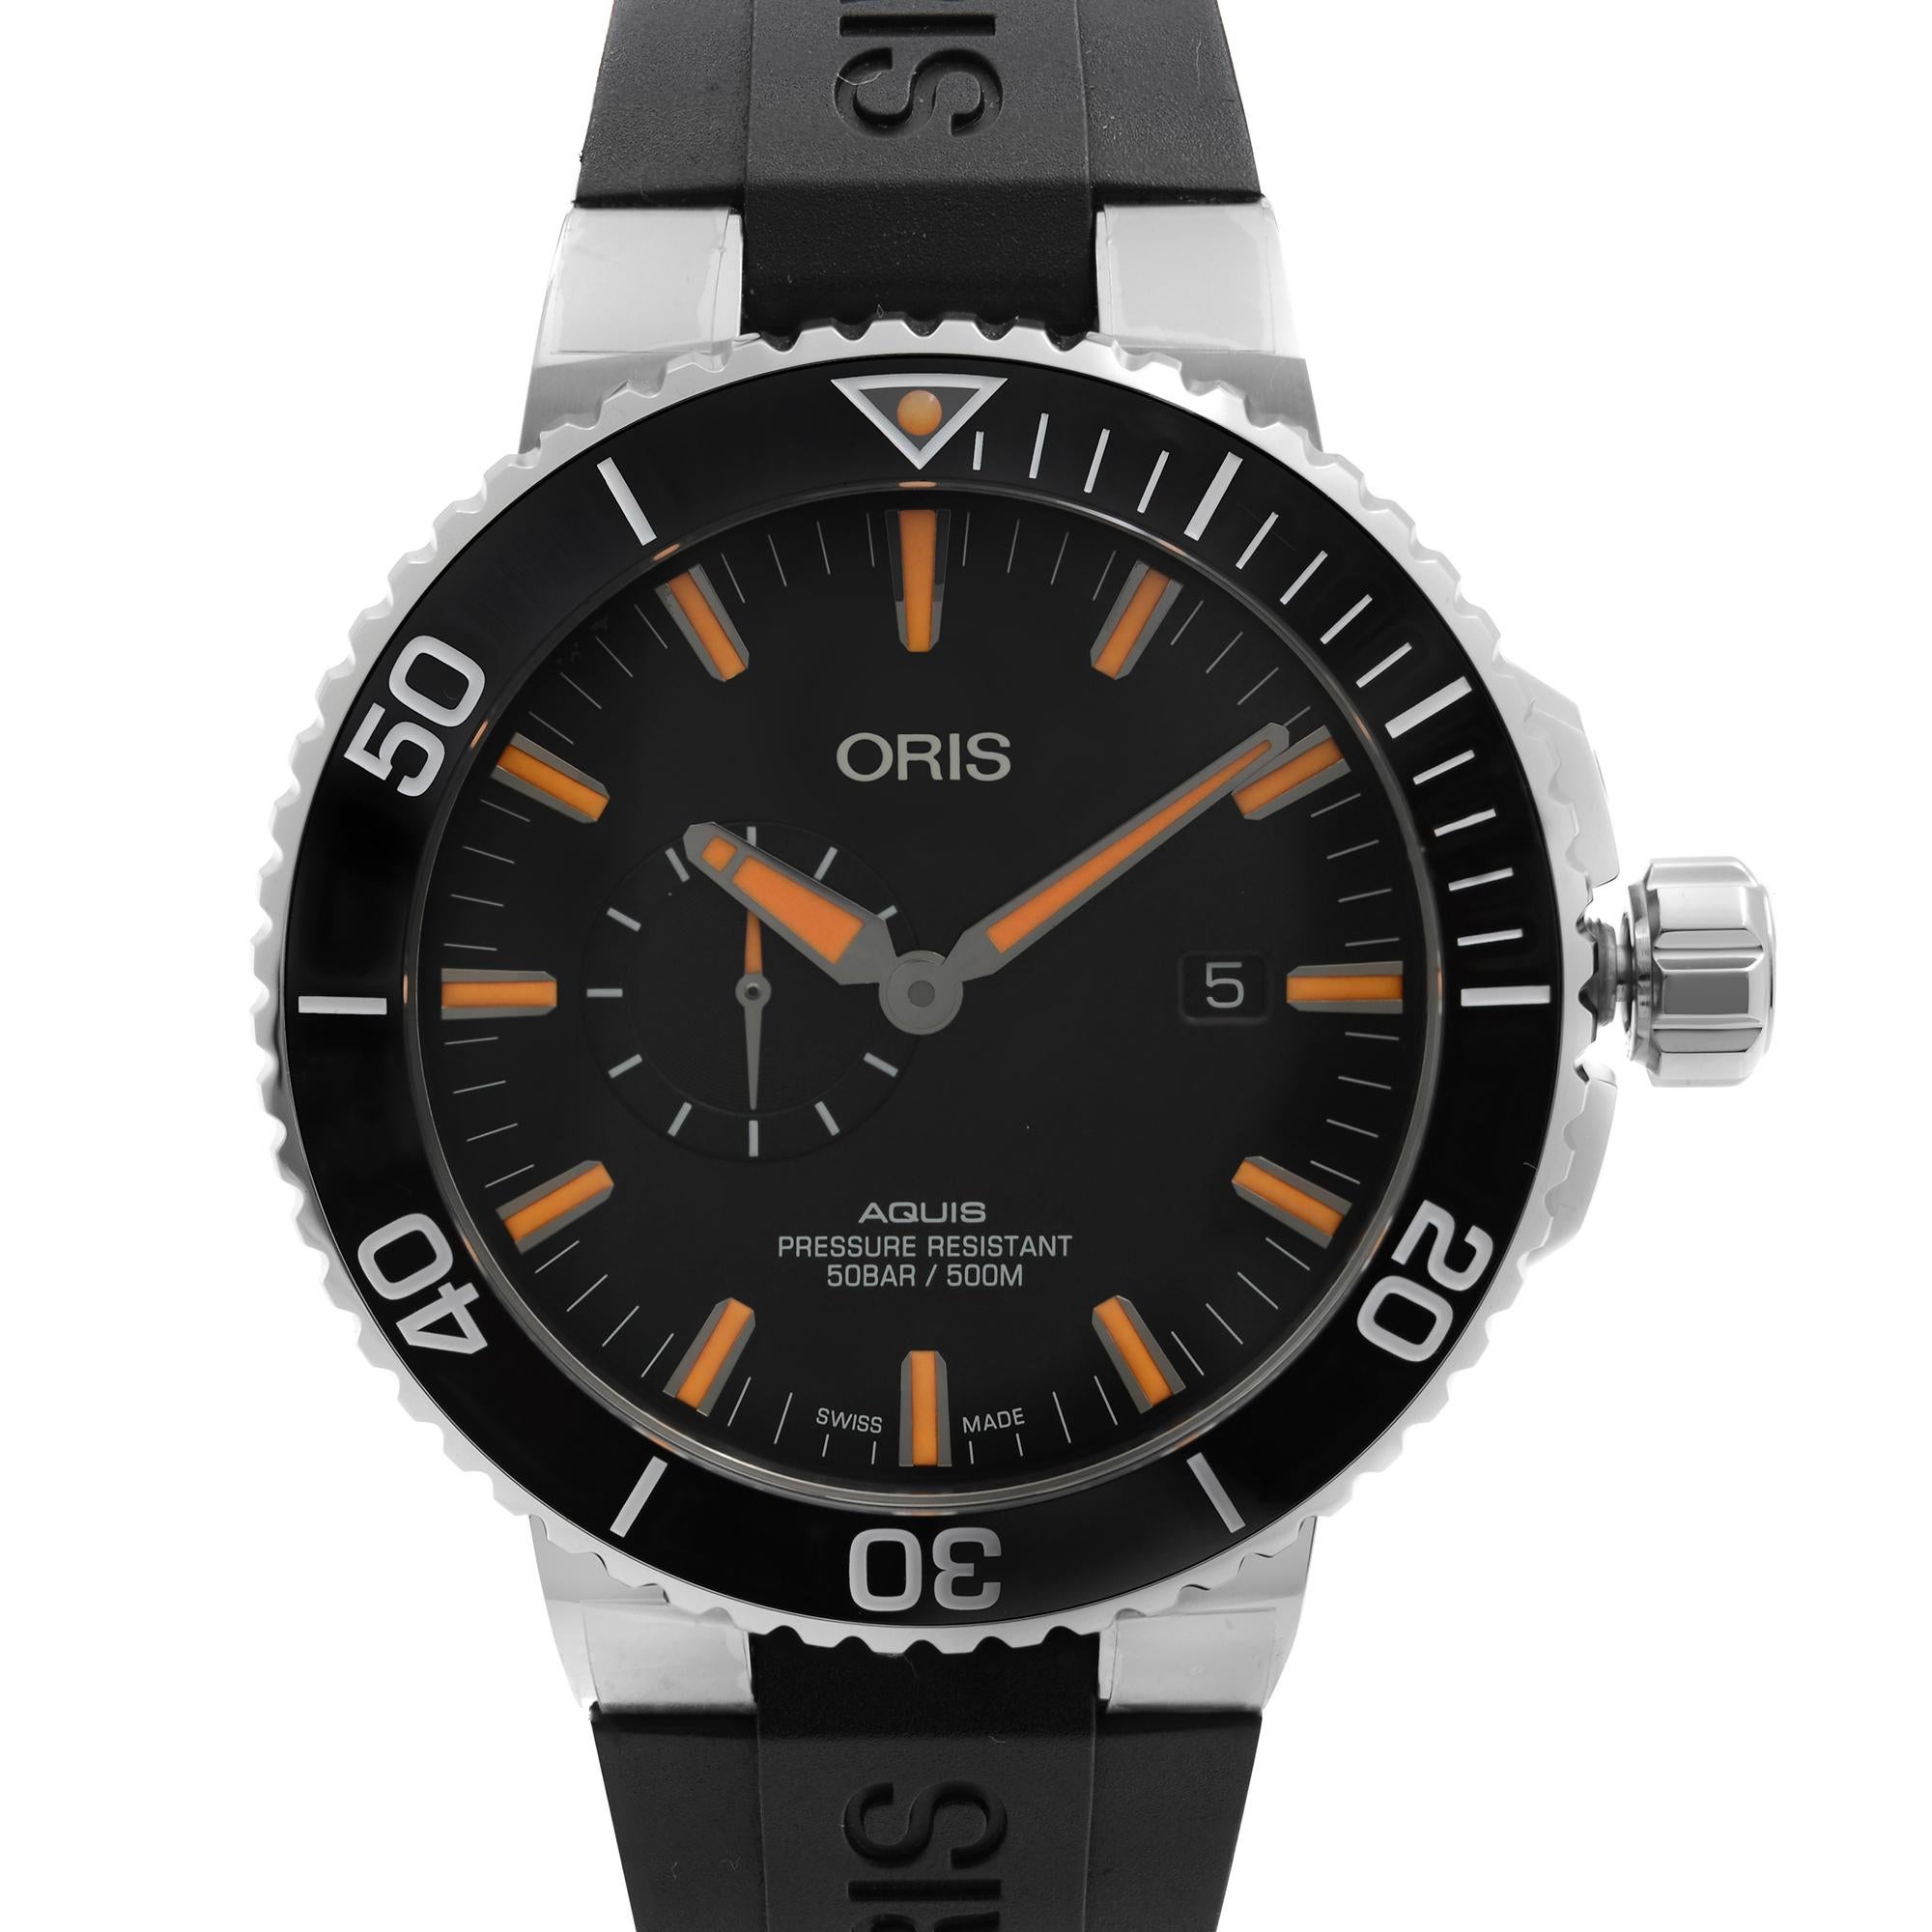 Display Model Oris Aquis Small Second Date 45.5mm Steel Black Dial Automatic Men's Watch 01 743 7733 4159-07 4 24 64EB This Beautiful Timepiece is Powered by Mechanical (Automatic) Movement And Features: Round Stainless Steel Case with a Black